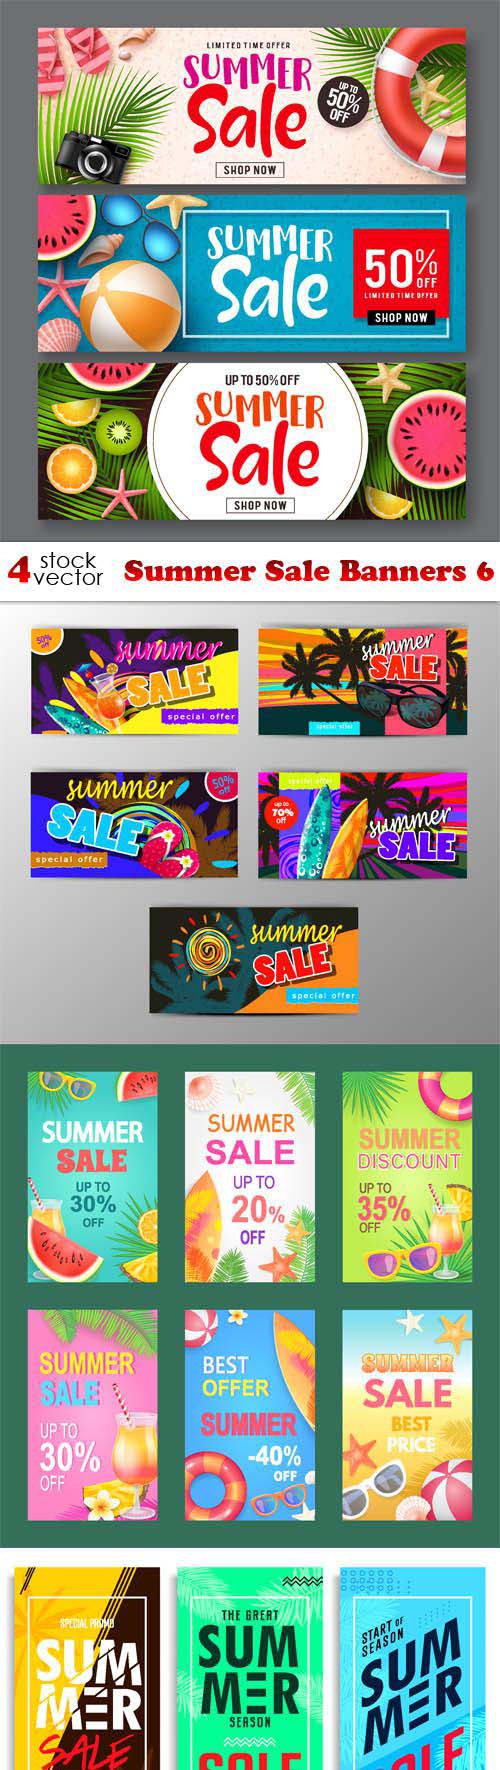 Summer Sale Banners 6